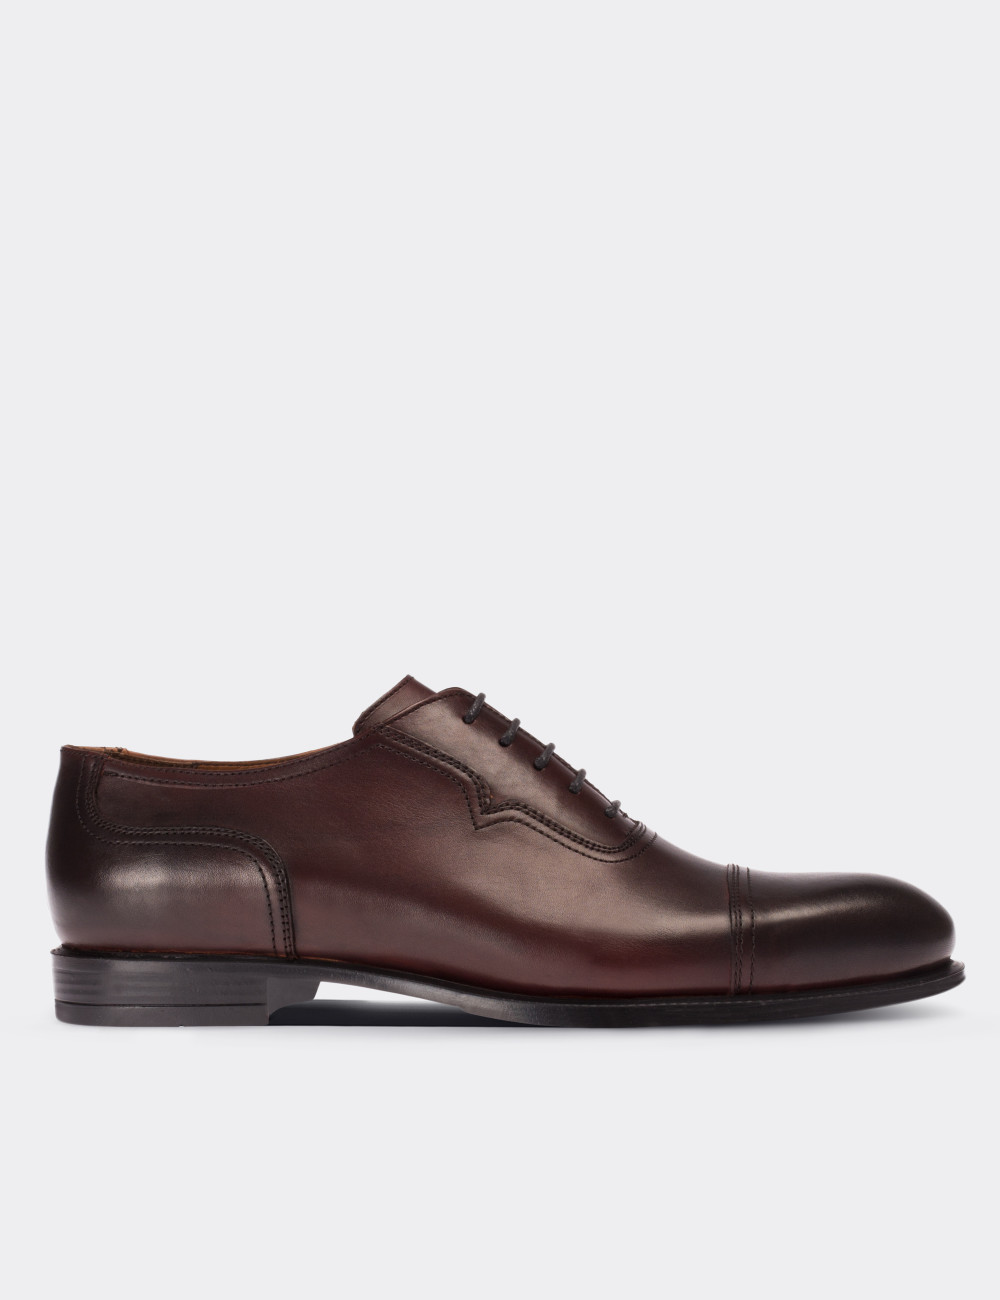 Burgundy  Leather Classic Shoes - 01679MBRDC01